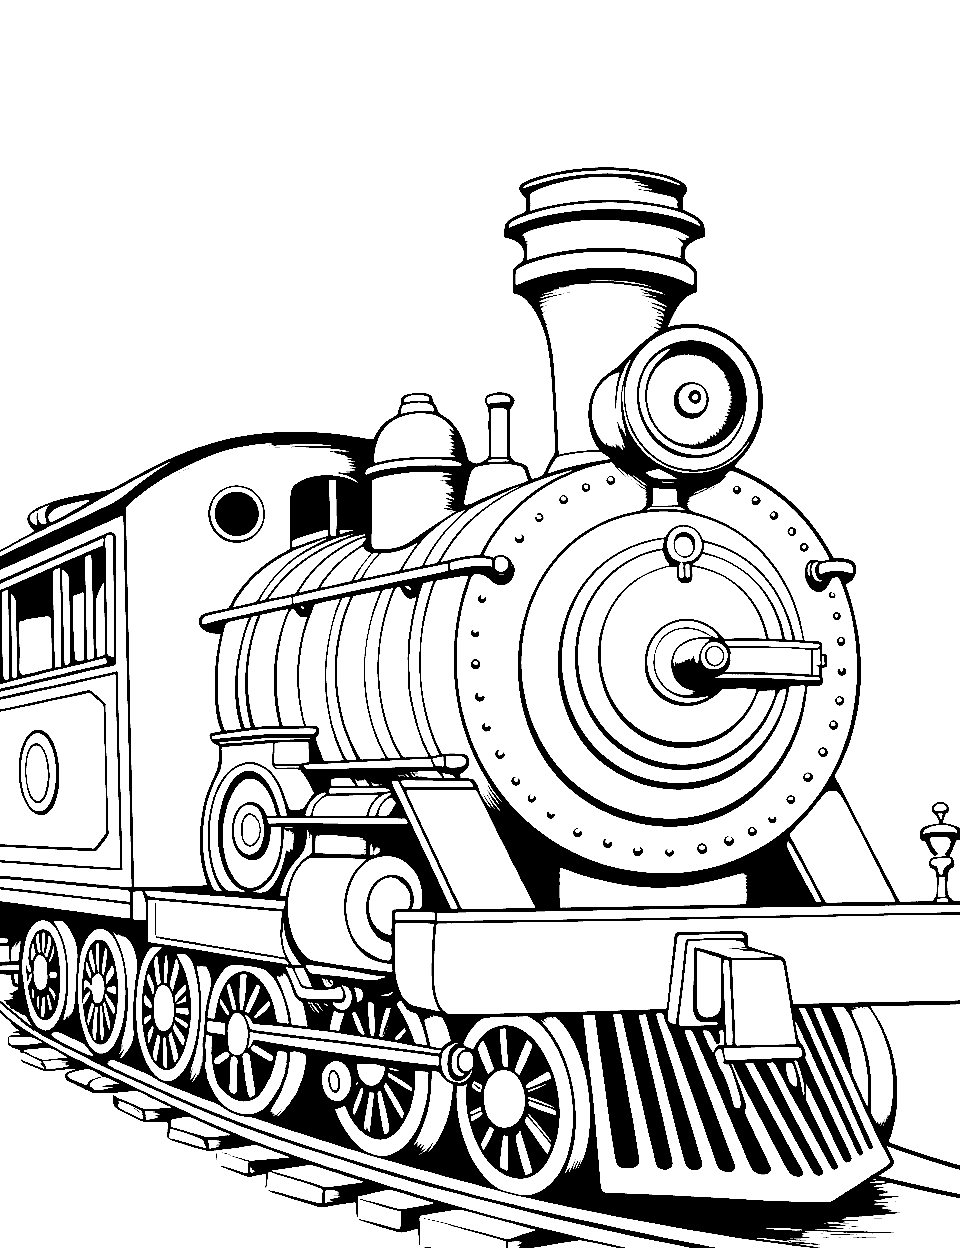 Steampunk Train Coloring Page - A train engine with a steampunk design.